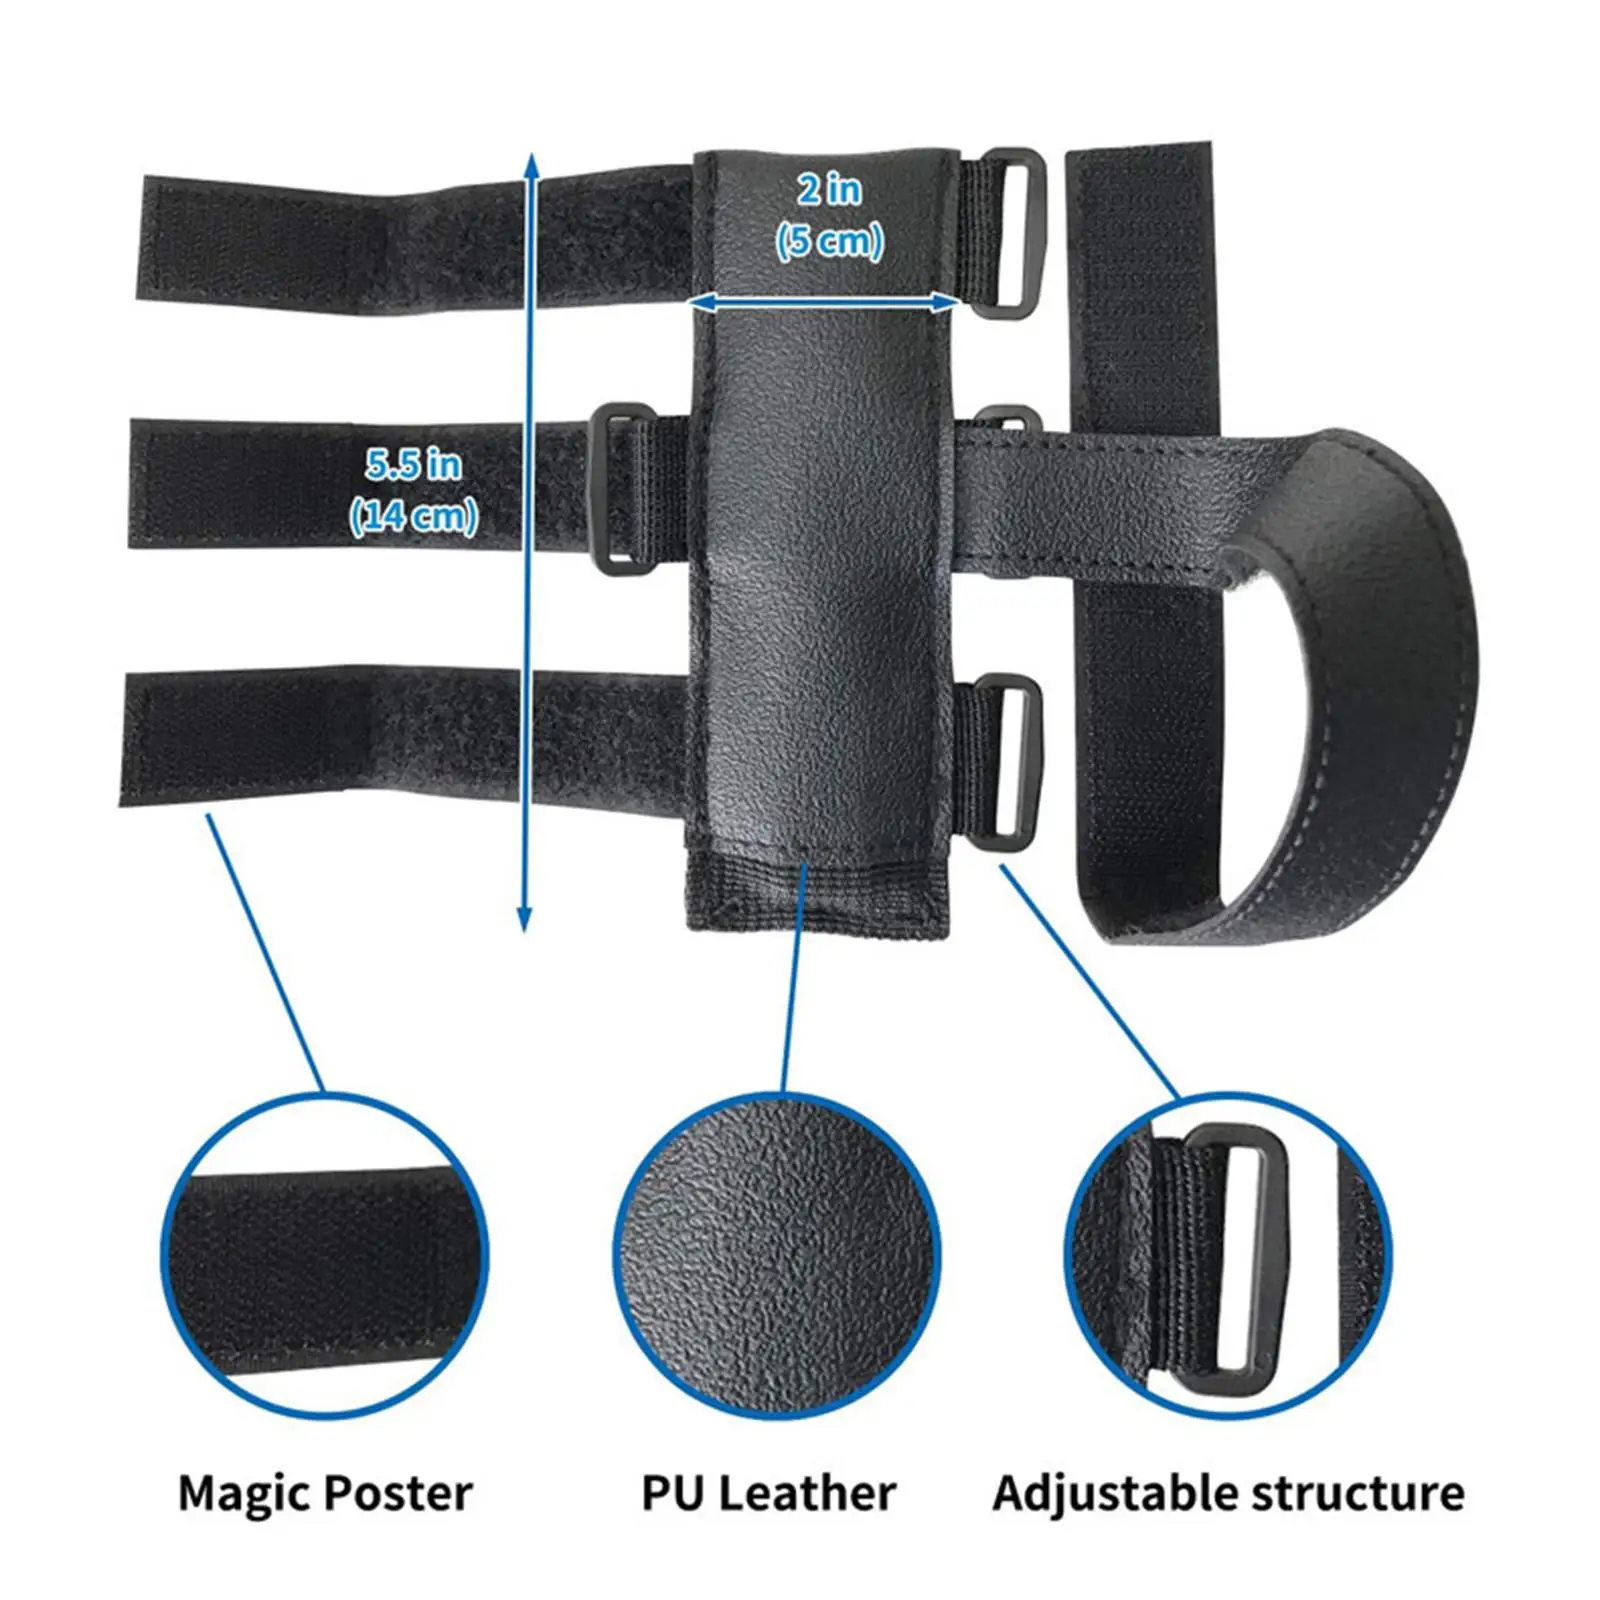 Portable Bike Speaker Mounted Fixed Strap Adjustable for Outdoor Activities